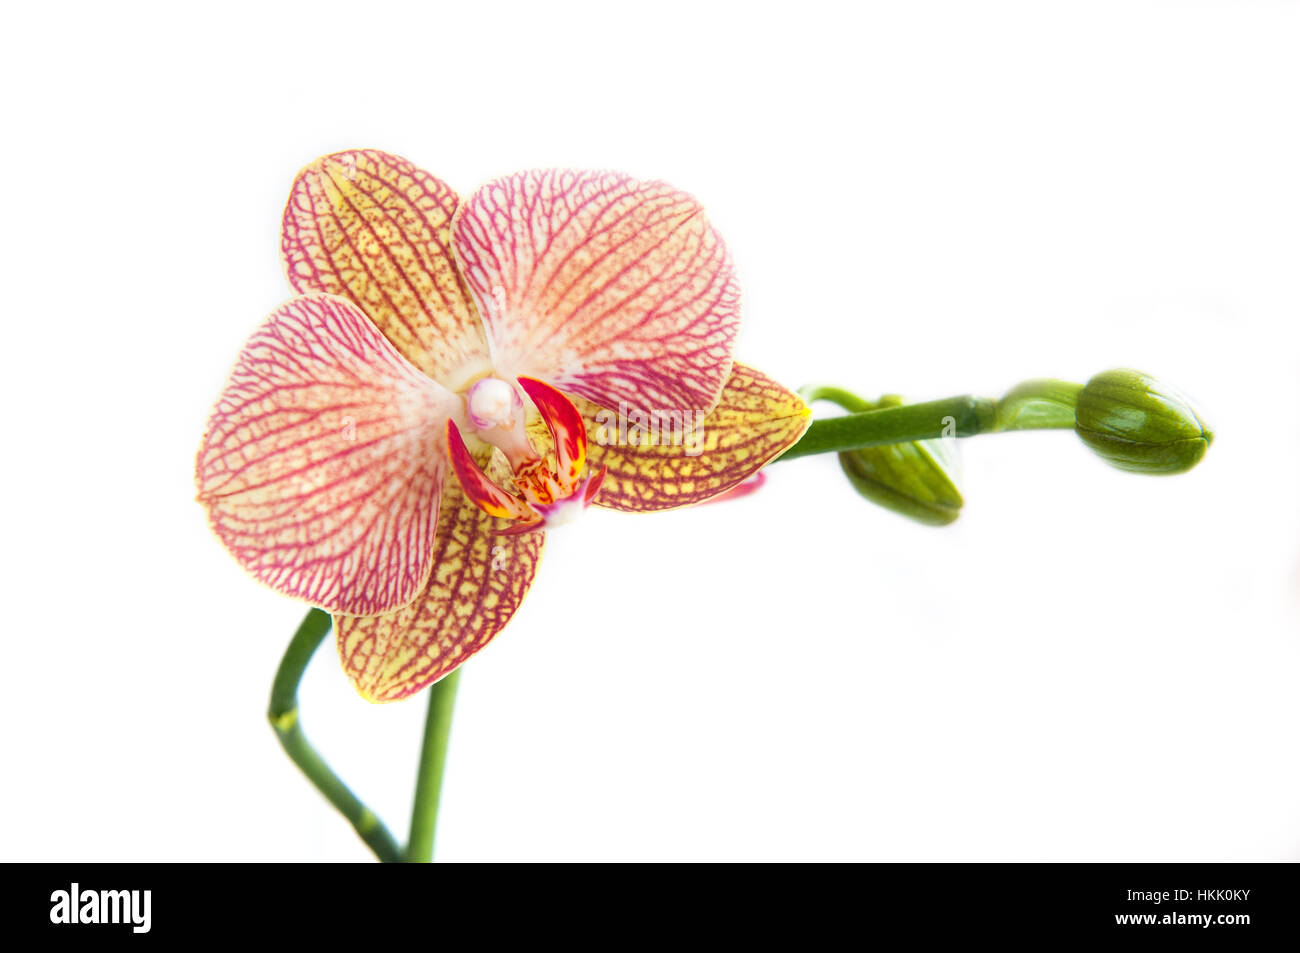 Beautiful fresh Orchid Phalaenopsis flower with stems isolated on white background. Stock Photo